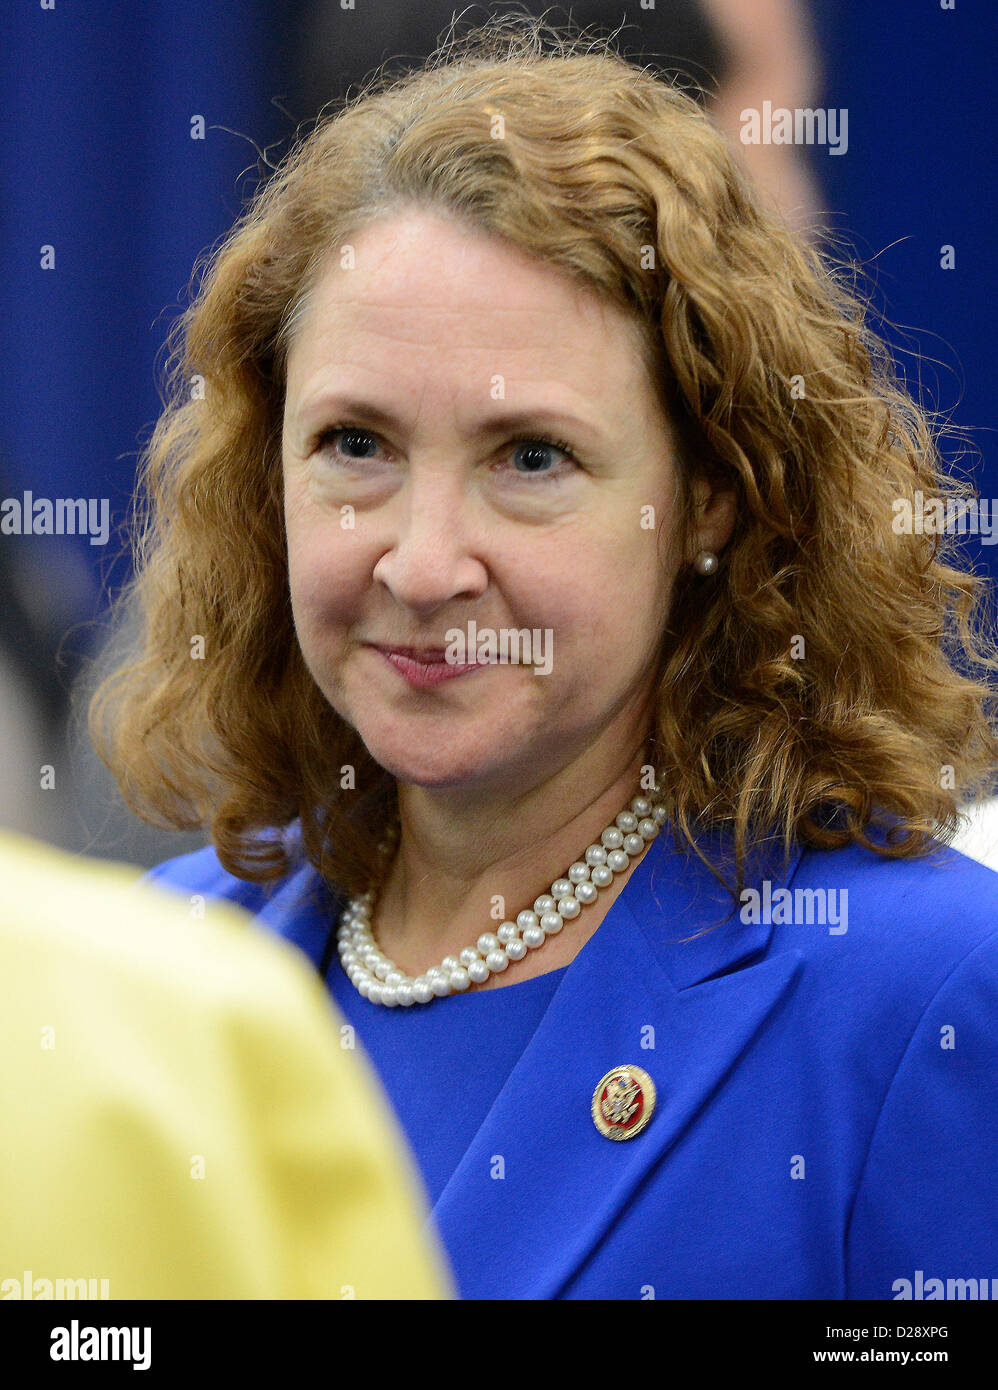 United States Representative Elizabeth Esty (Democrat of Connecticut) attends the remarks of U.S. President Barack Obama and Vice President Joe Biden at an event at the White House in Washington, D.C. to unveil a set of proposals to reduce gun violence on Wednesday, January 16, 2012. .Credit: Ron Sachs / CNP Stock Photo